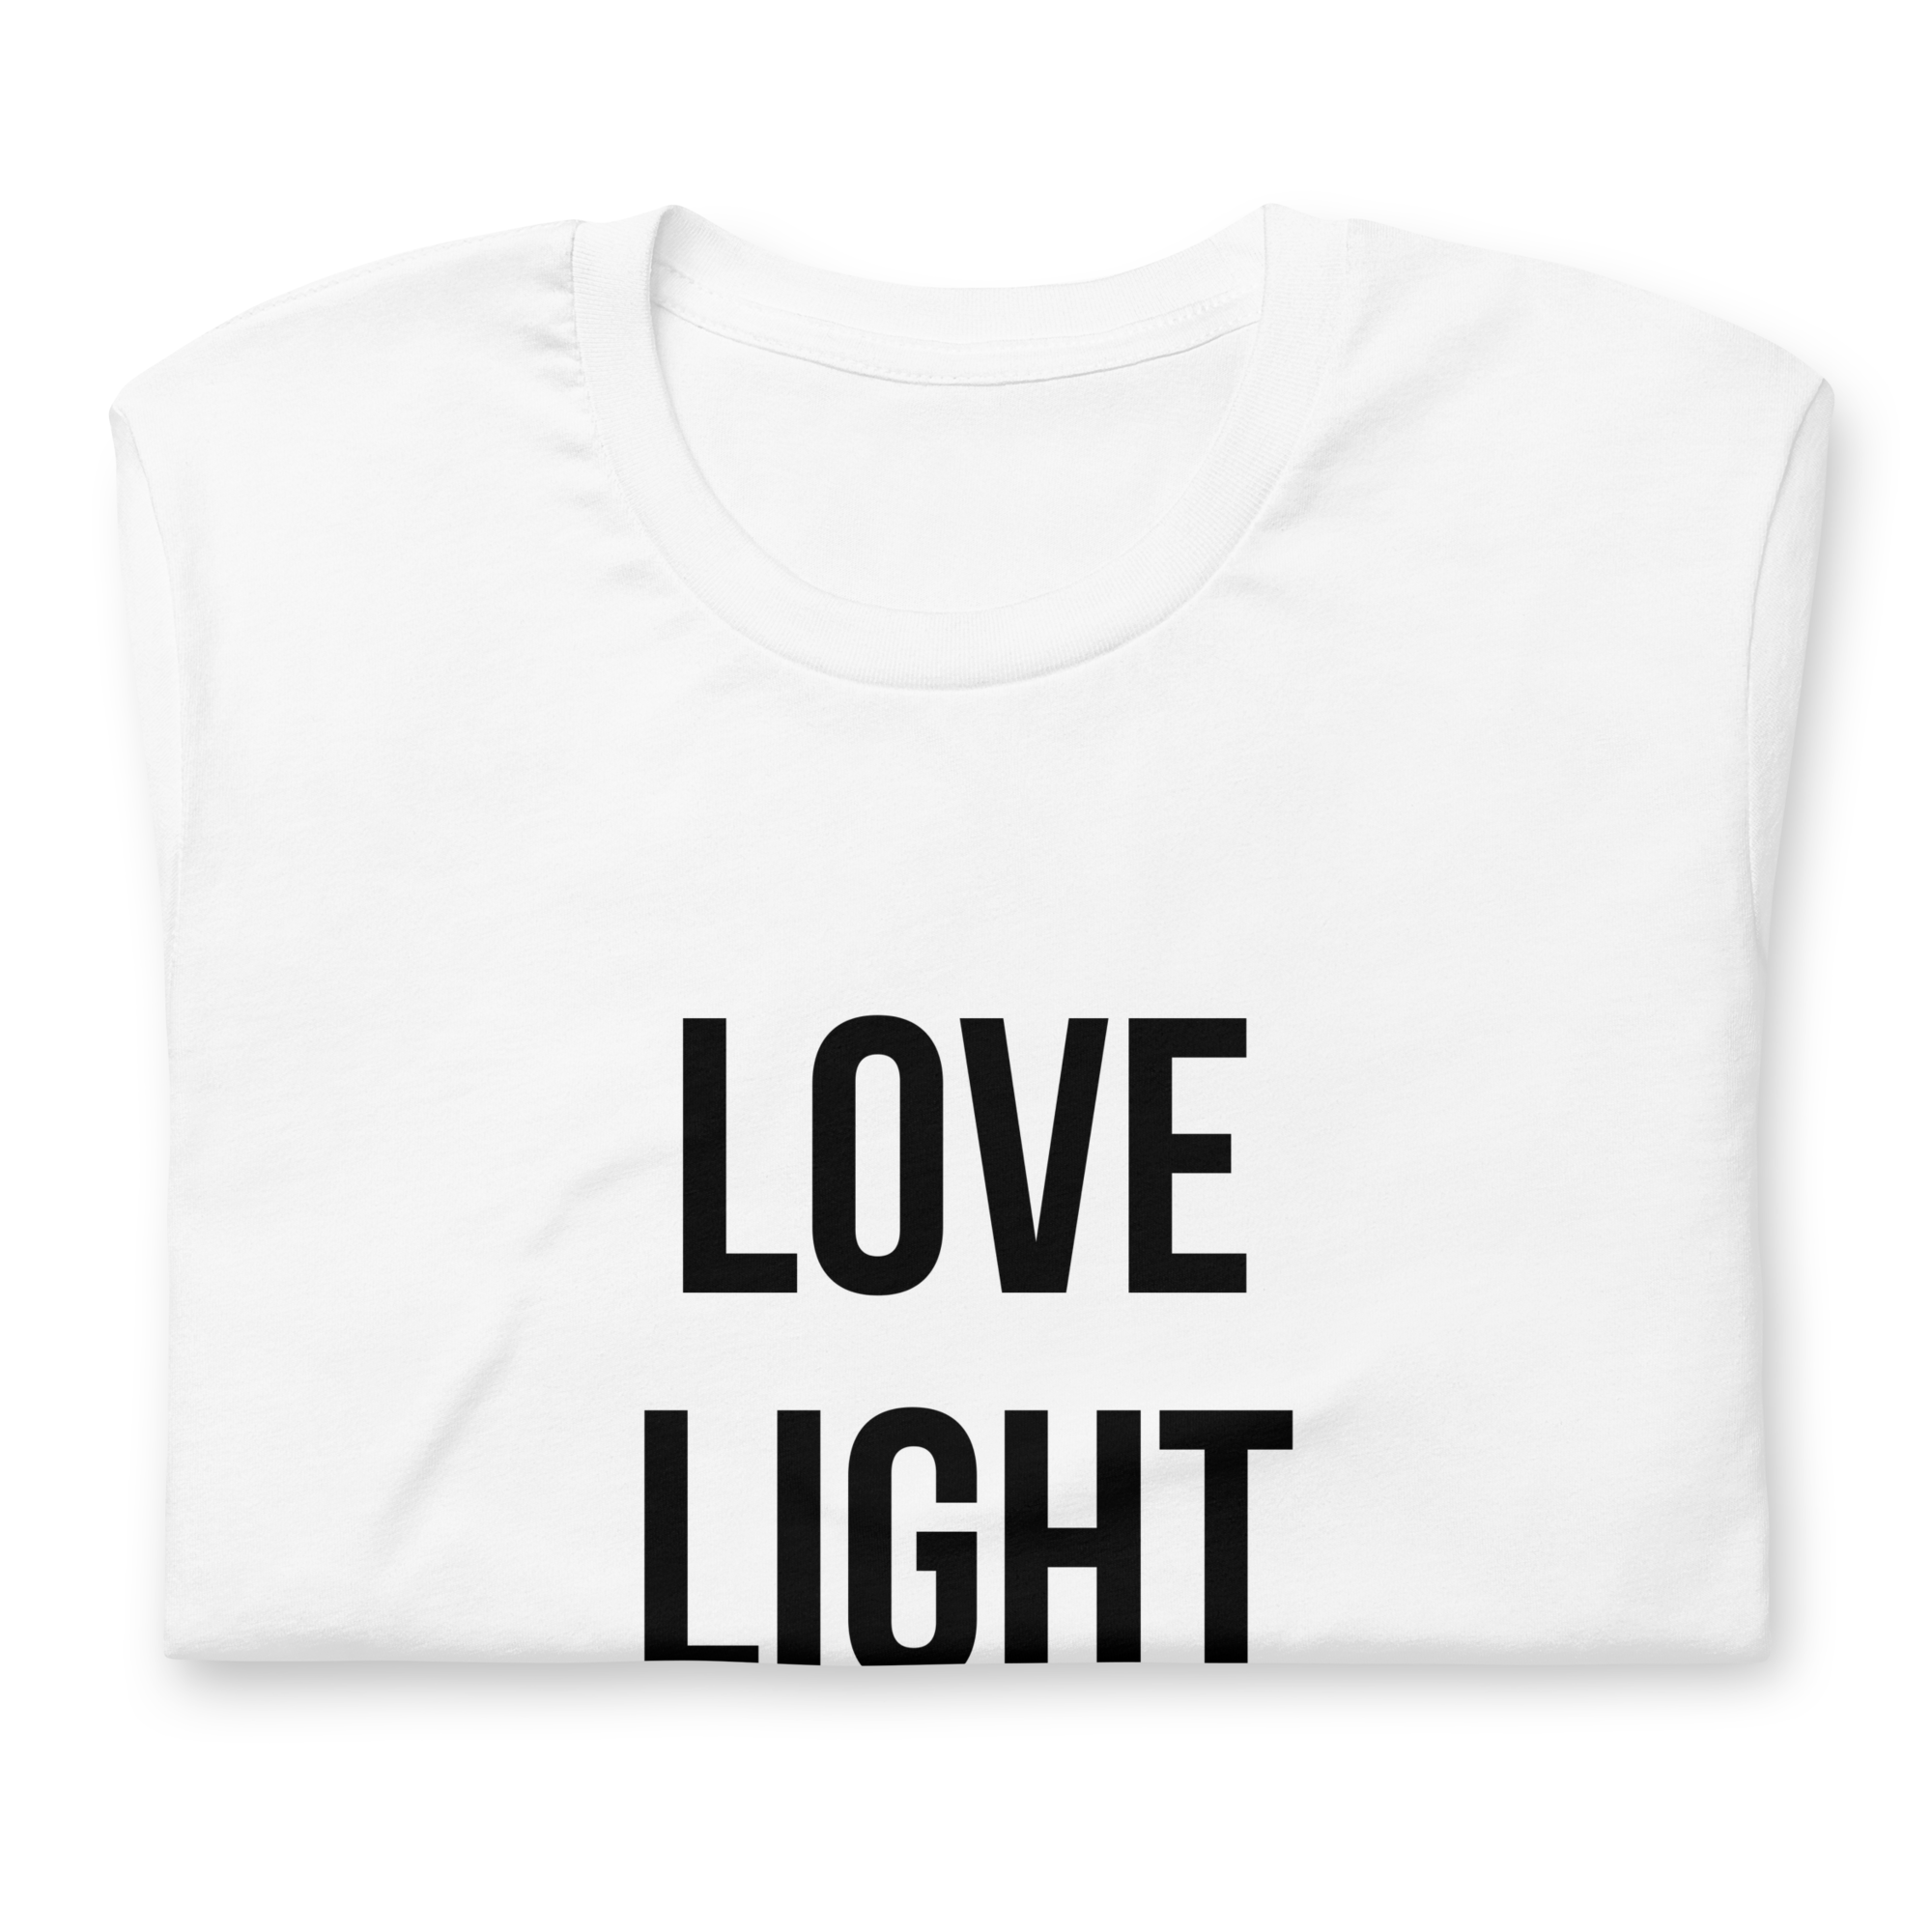 Love Light and a Little Go Fuck Yourself Loose Fit Tee - Yoga Bitch